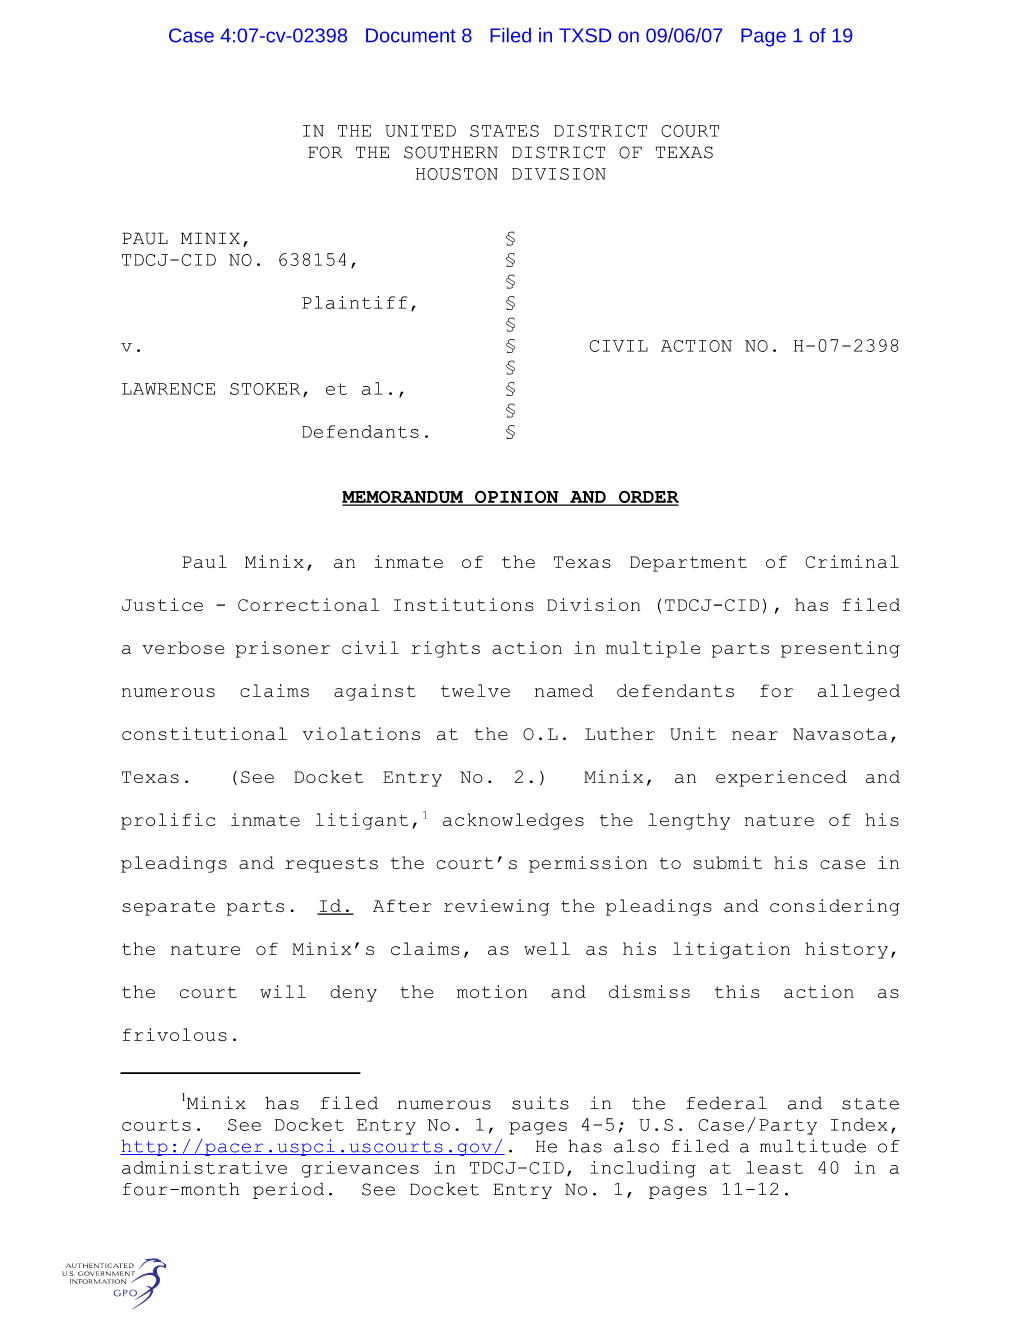 Case 4:07-Cv-02398 Document 8 Filed in TXSD on 09/06/07 Page 1 of 19